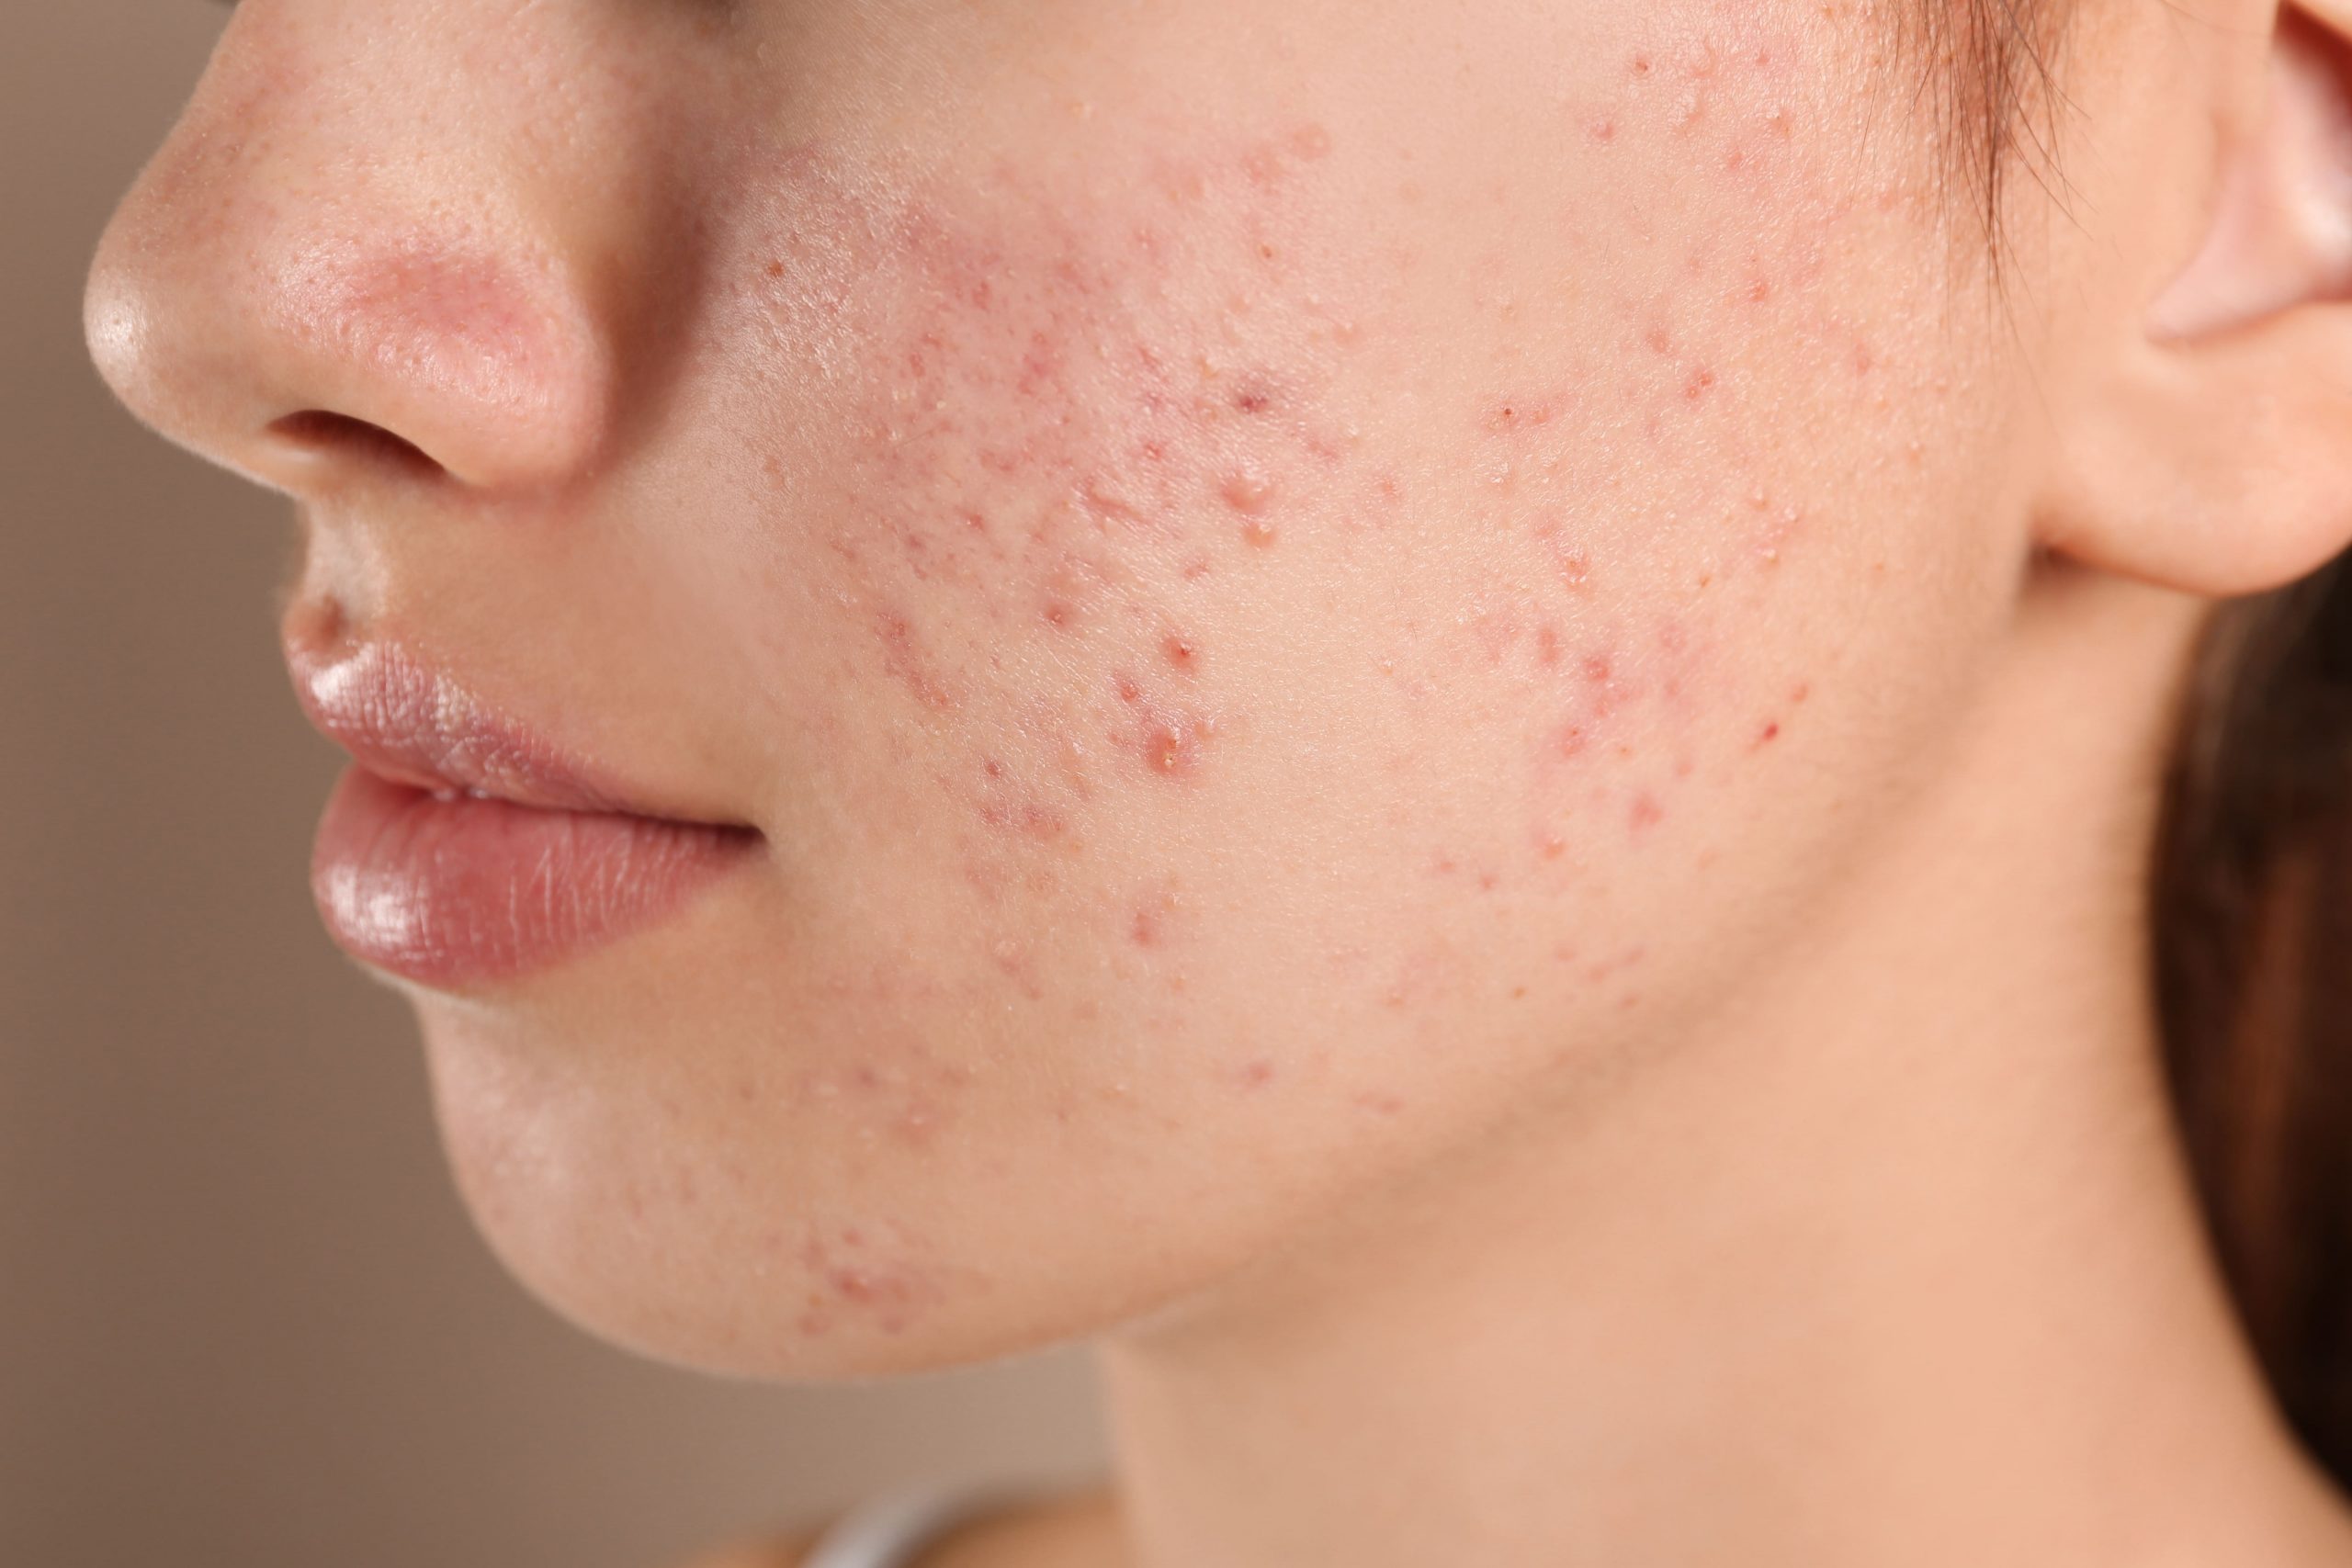 How To Get Rid of Hormonal Acne